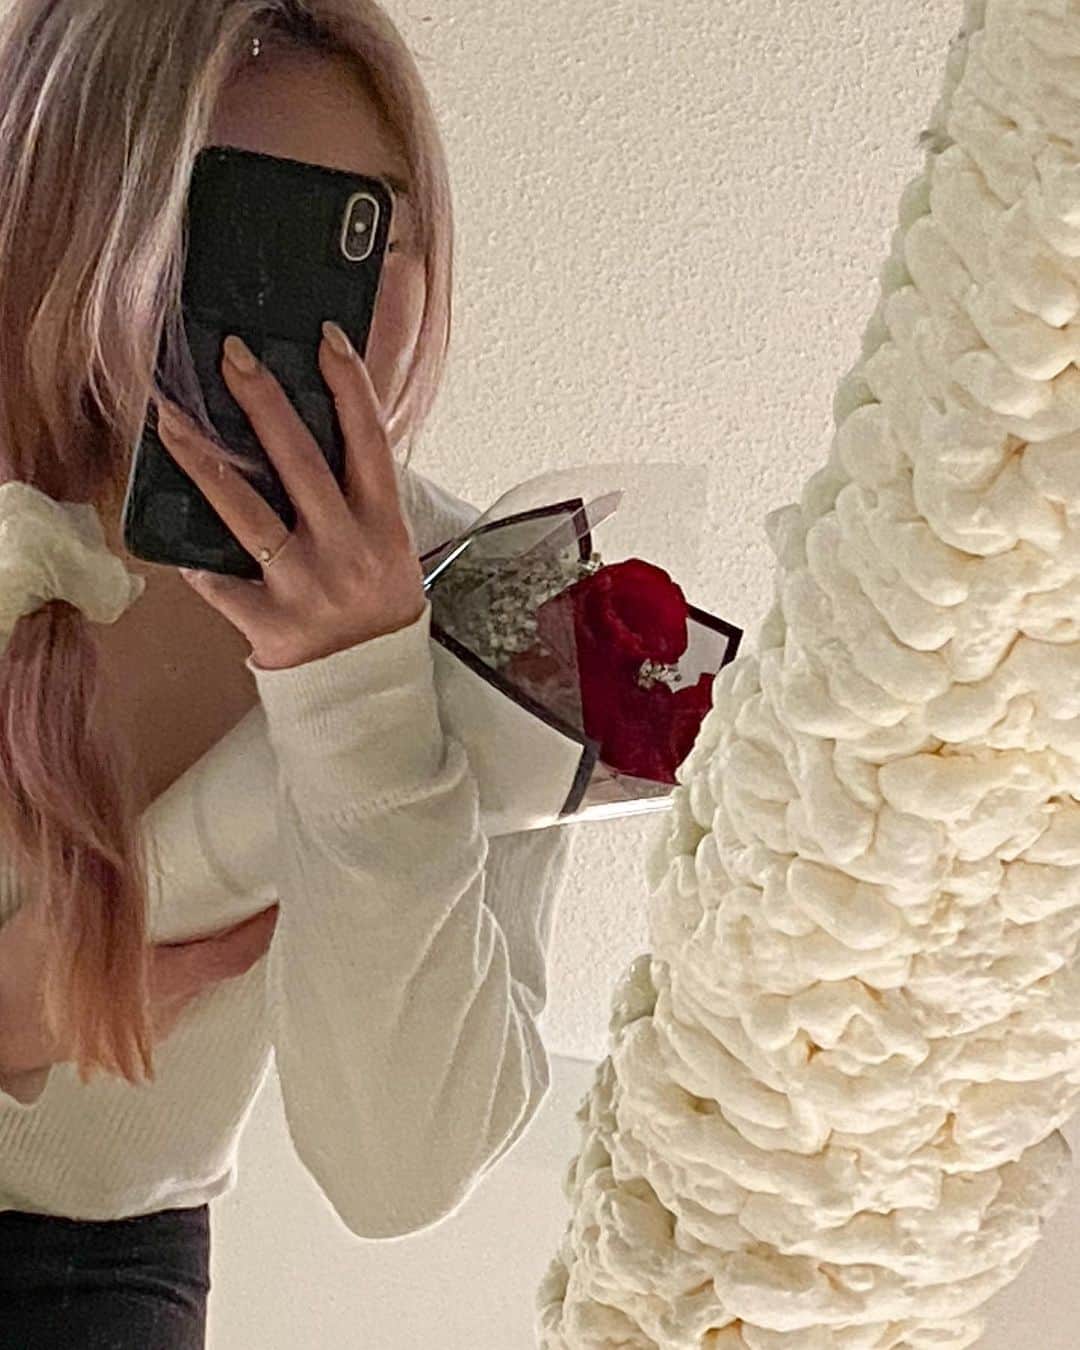 Megan Yimのインスタグラム：「Roses are red My hair is pink Just made a mirror What do y’all think?🥰  The simplest things make me really happy 🌹  What makes you happy?✨」